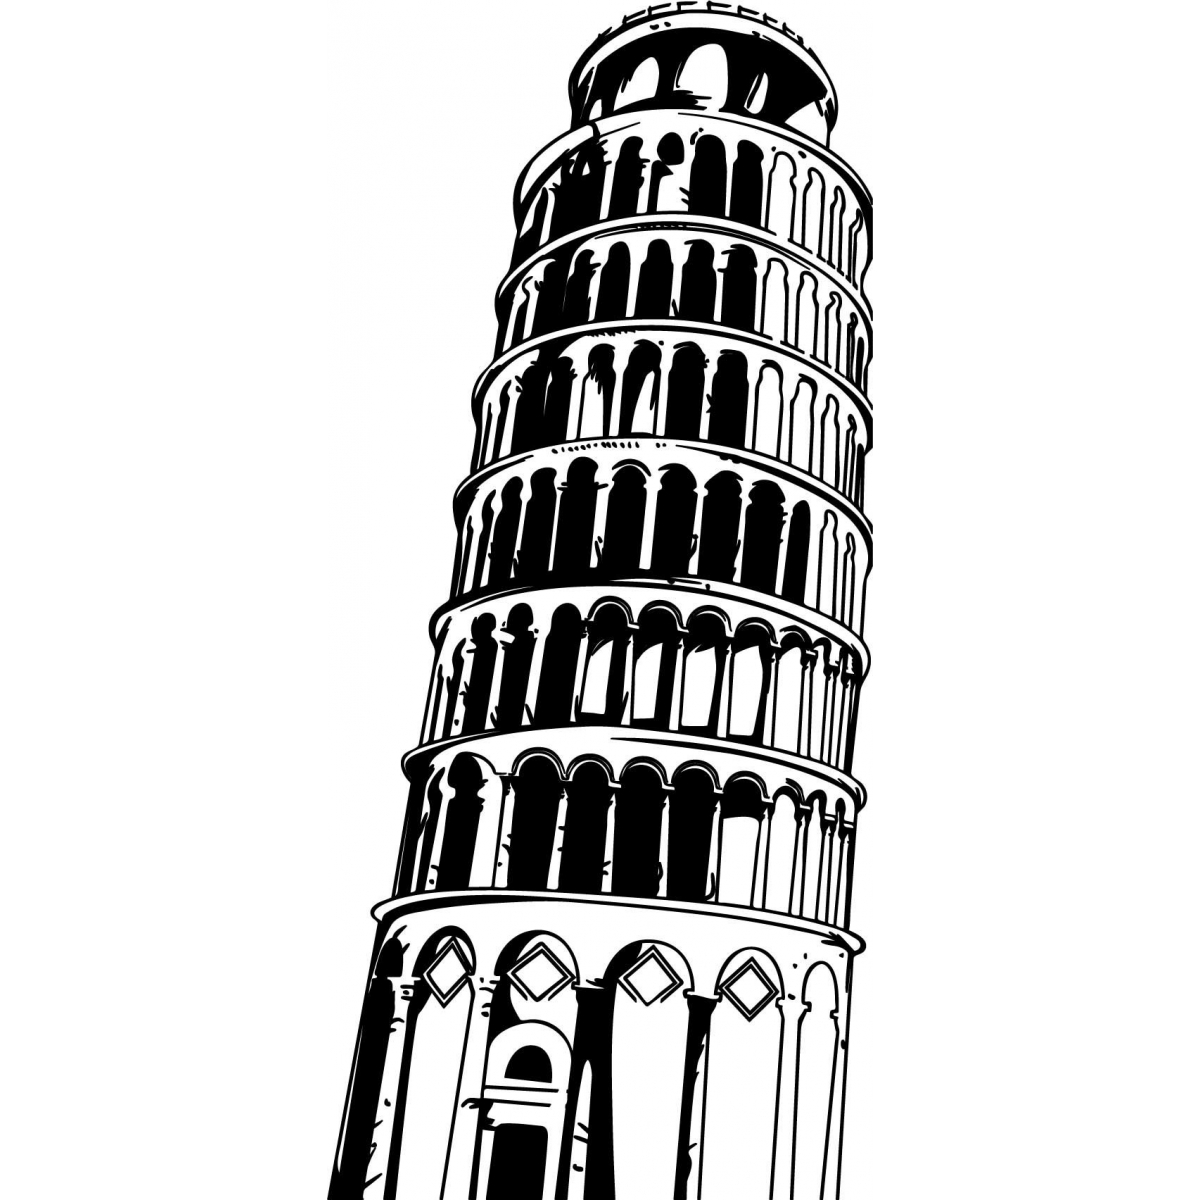 ... Leaning Tower Of Pisa Drawing - ClipArt Best ...